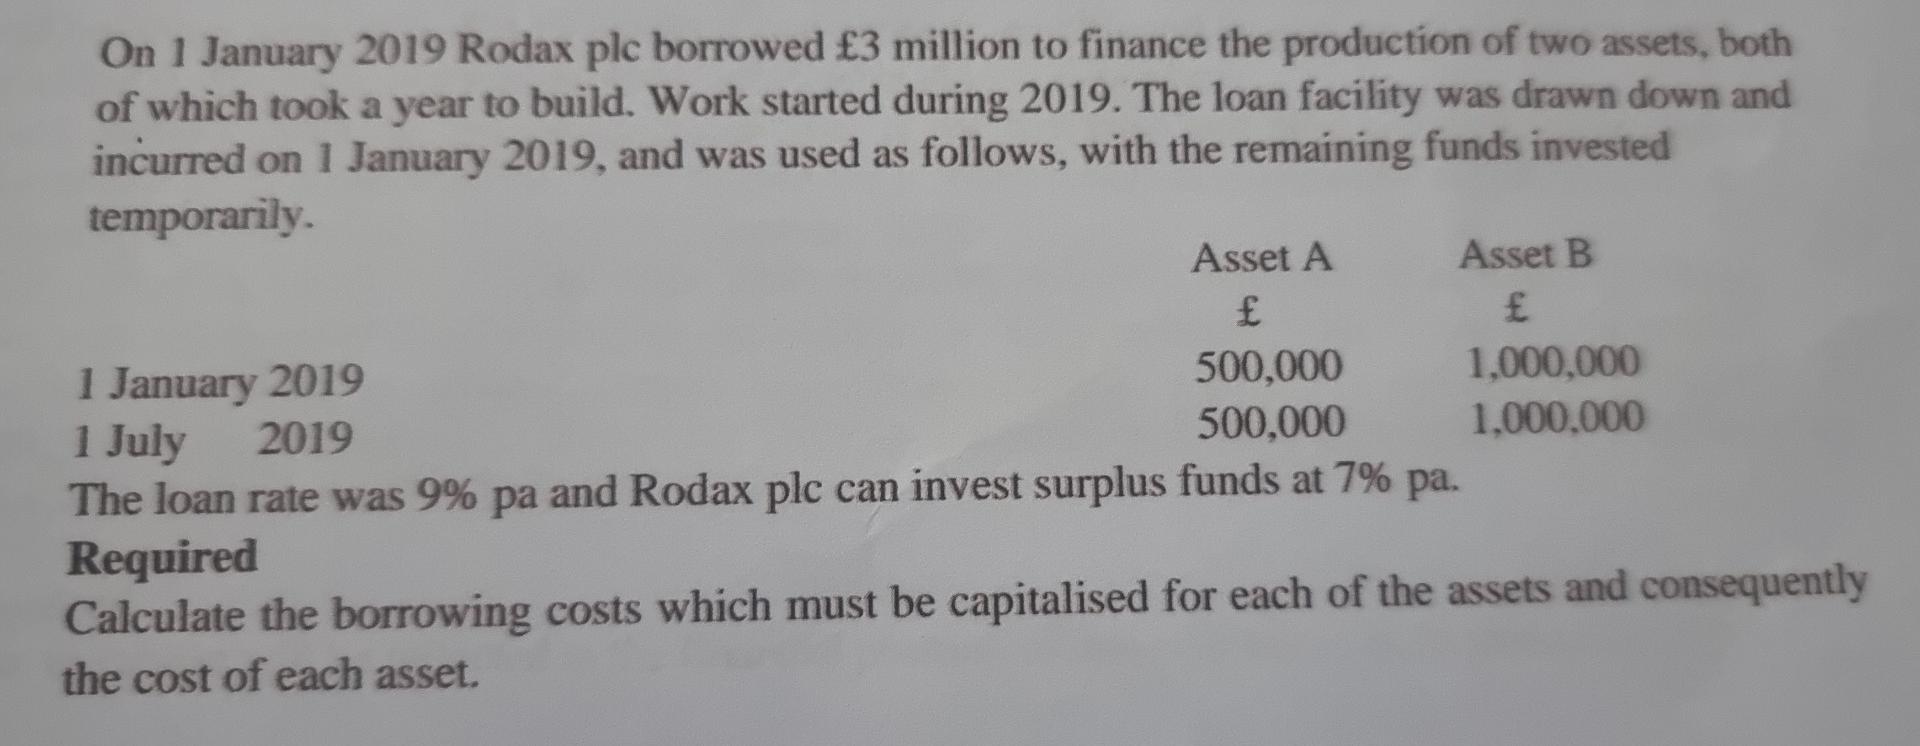 On 1 January 2019 Rodax plc borrowed ?3 million to finance the production of two assets, bothof which took a year to build.